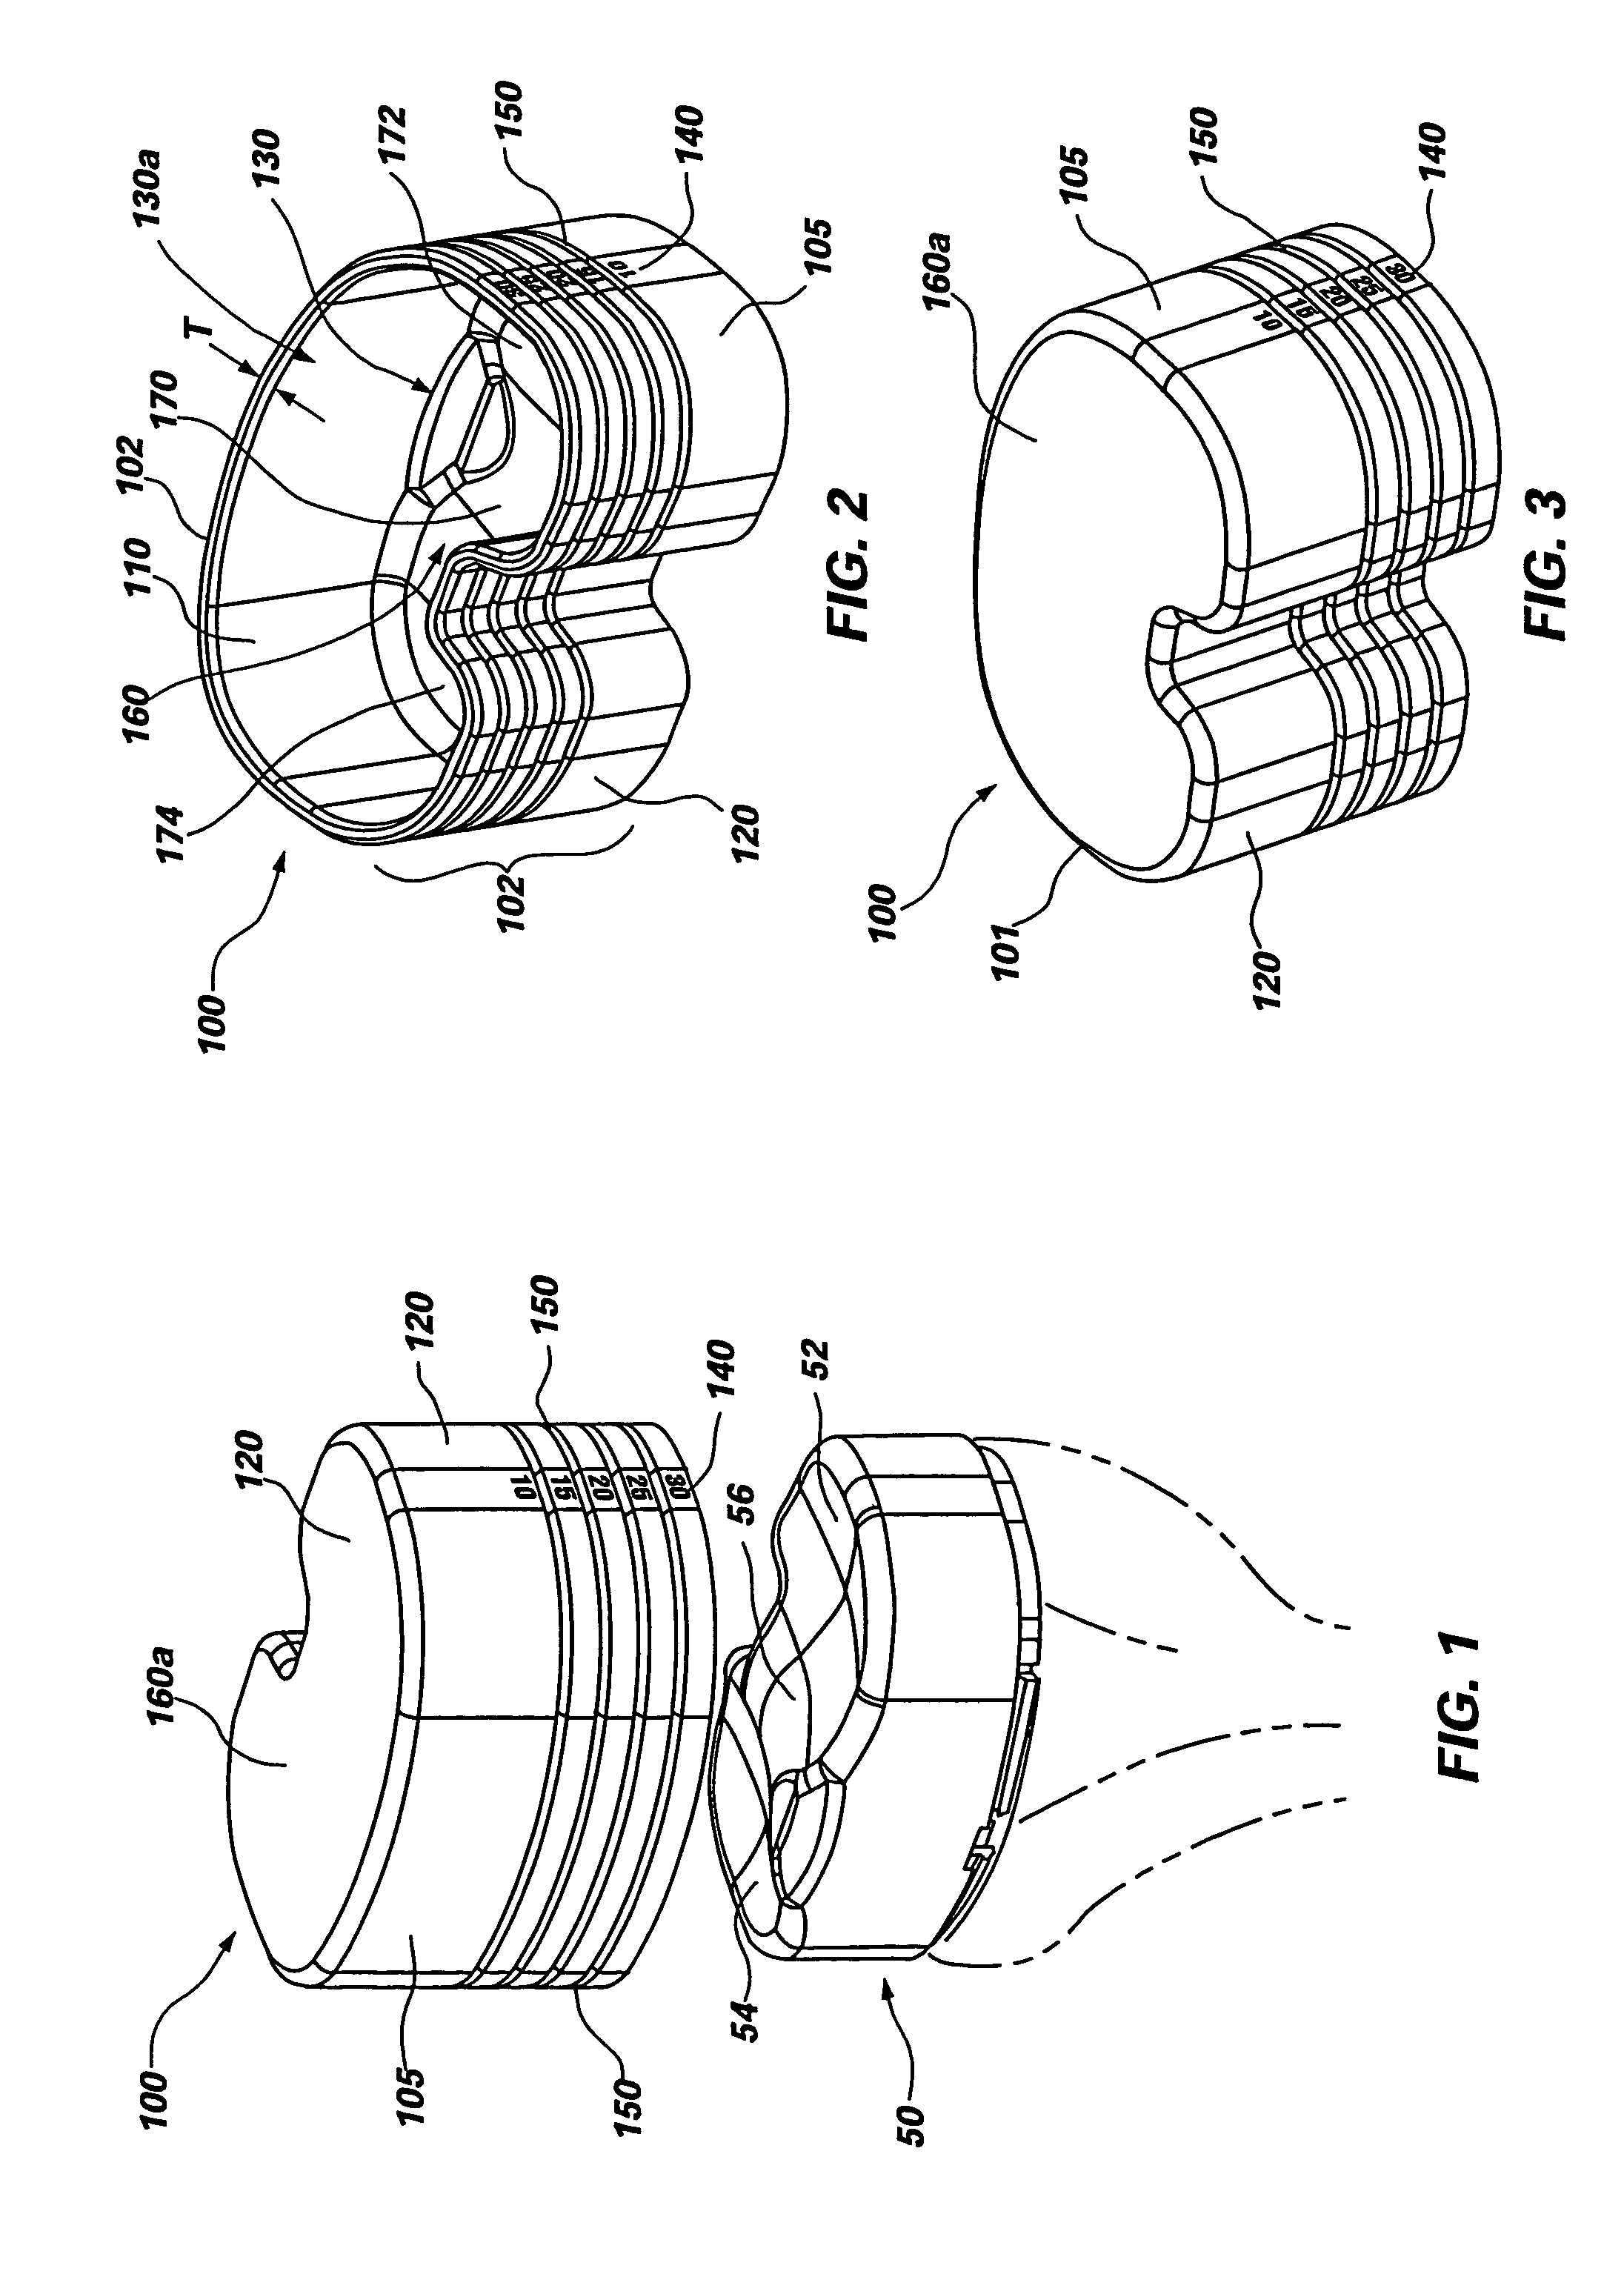 Method of forming a temporary prosthetic joint using a disposable mold